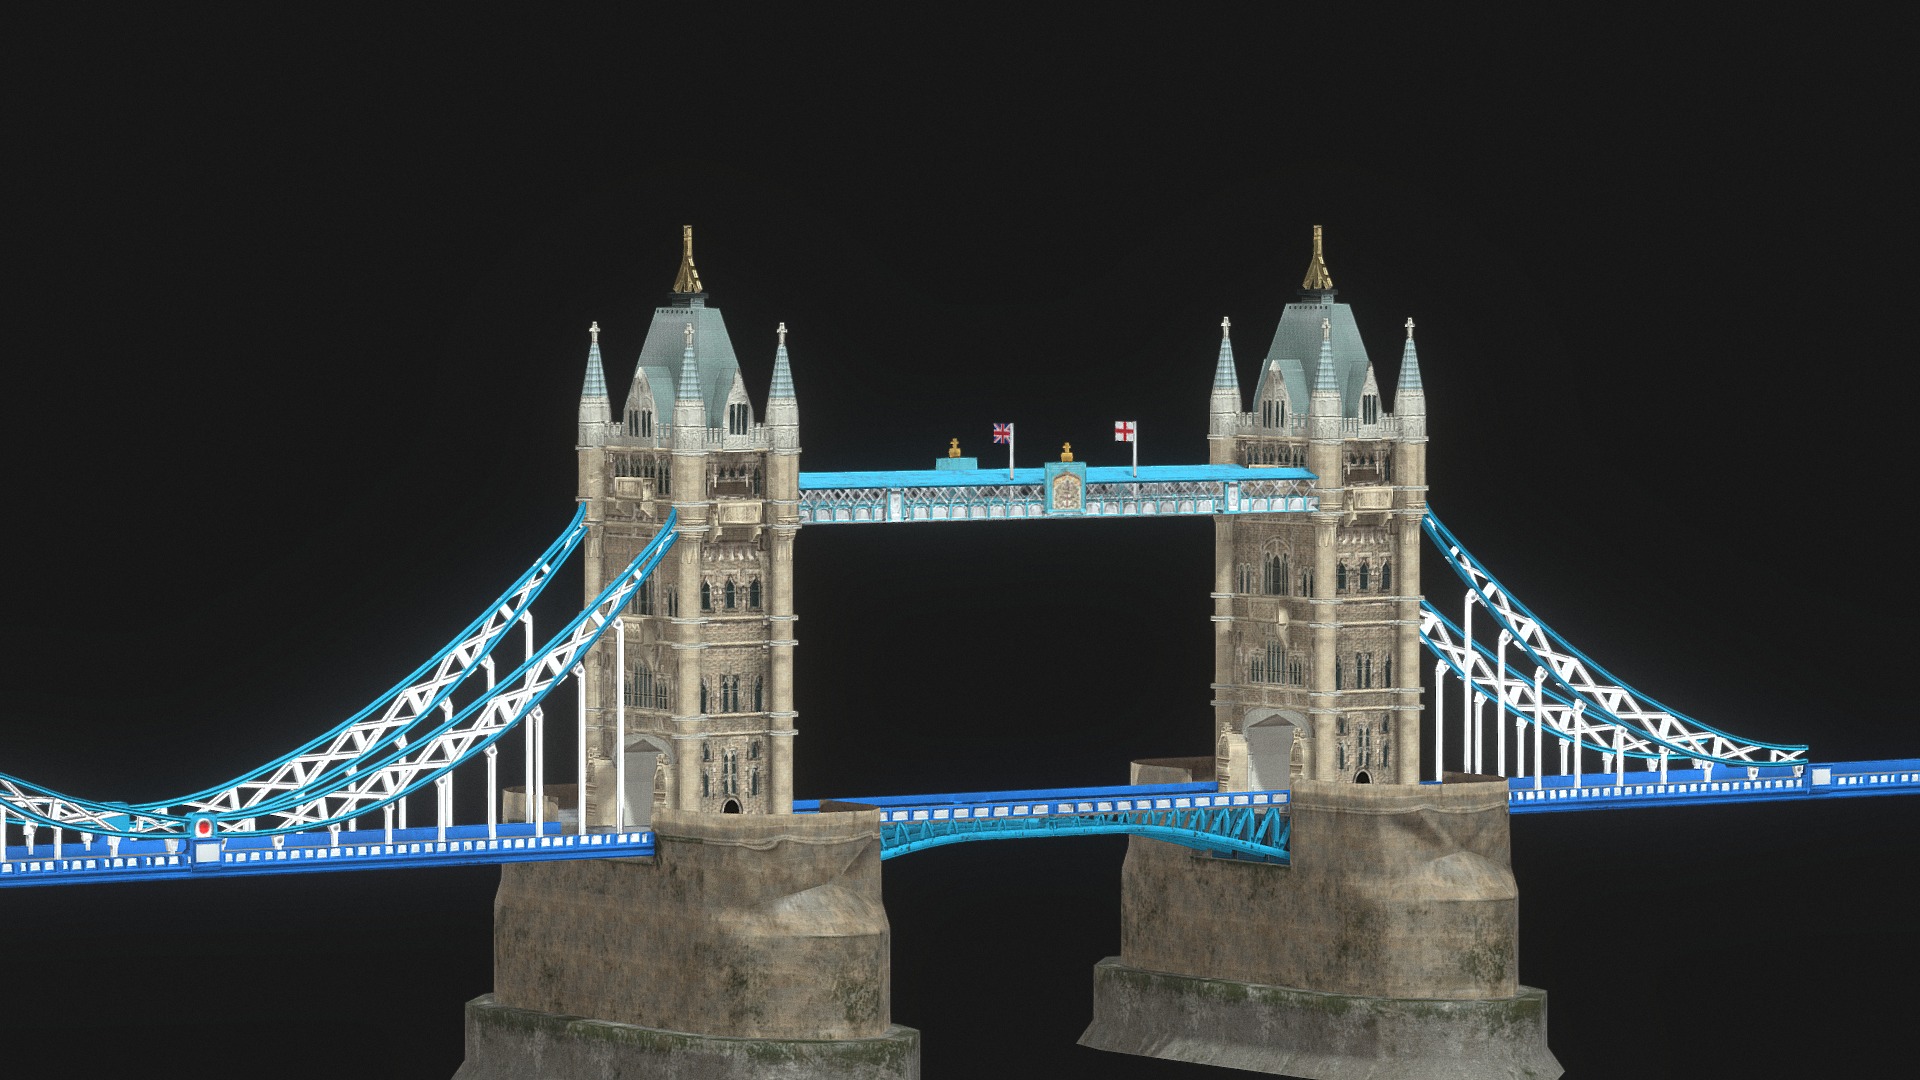 3D model Tower Bridge - This is a 3D model of the Tower Bridge. The 3D model is about Tower Bridge with towers and a blue bridge in the background.